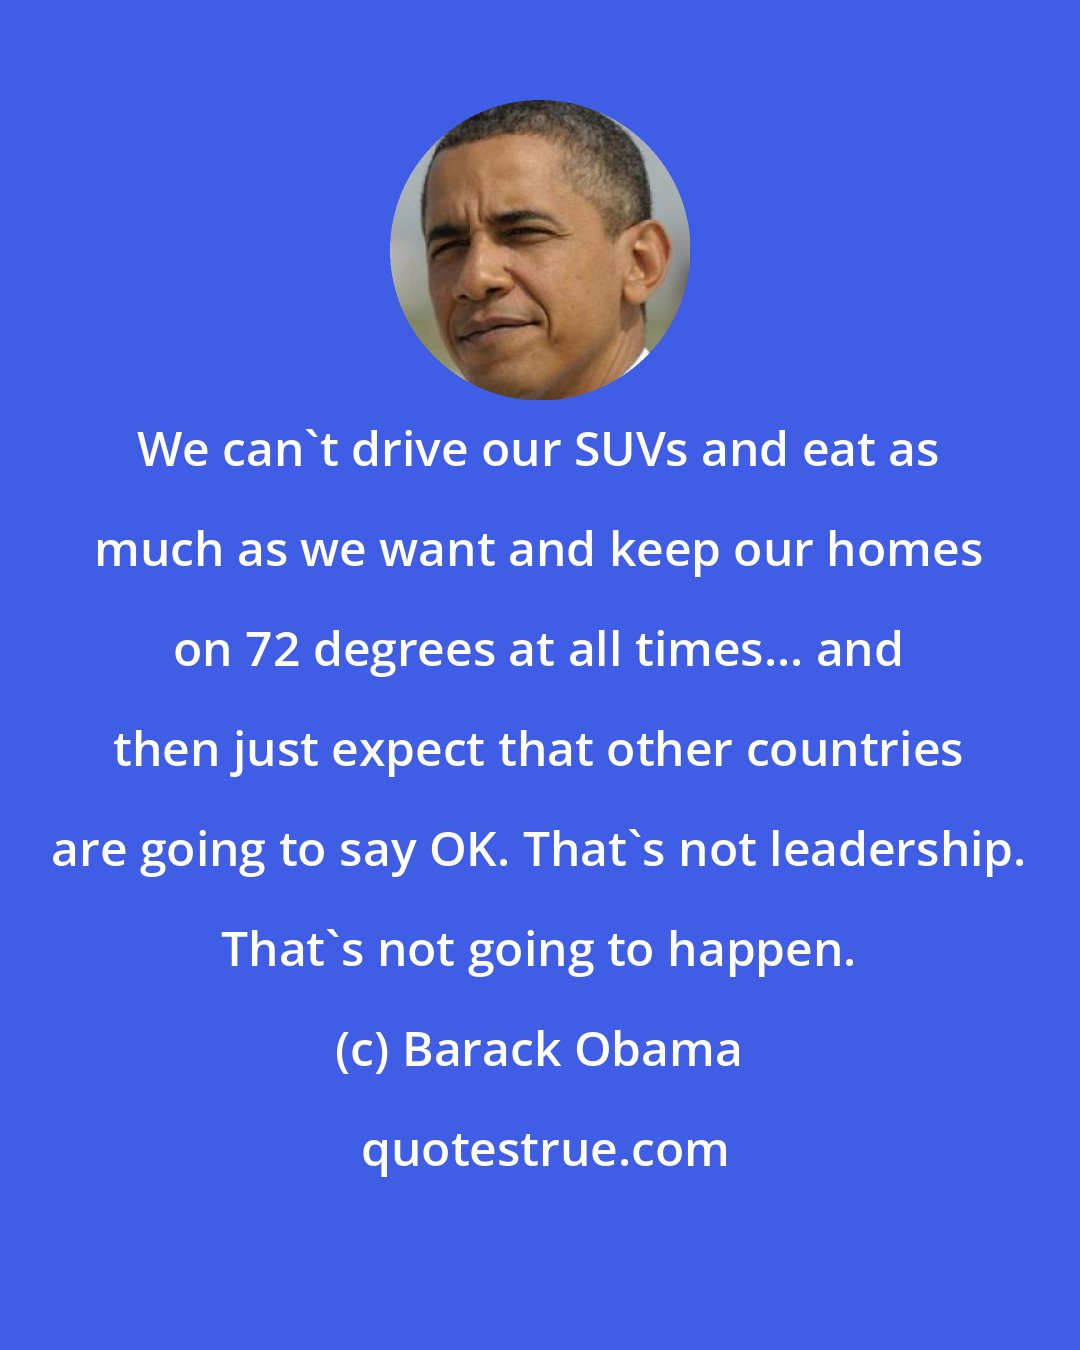 Barack Obama: We can't drive our SUVs and eat as much as we want and keep our homes on 72 degrees at all times... and then just expect that other countries are going to say OK. That's not leadership. That's not going to happen.